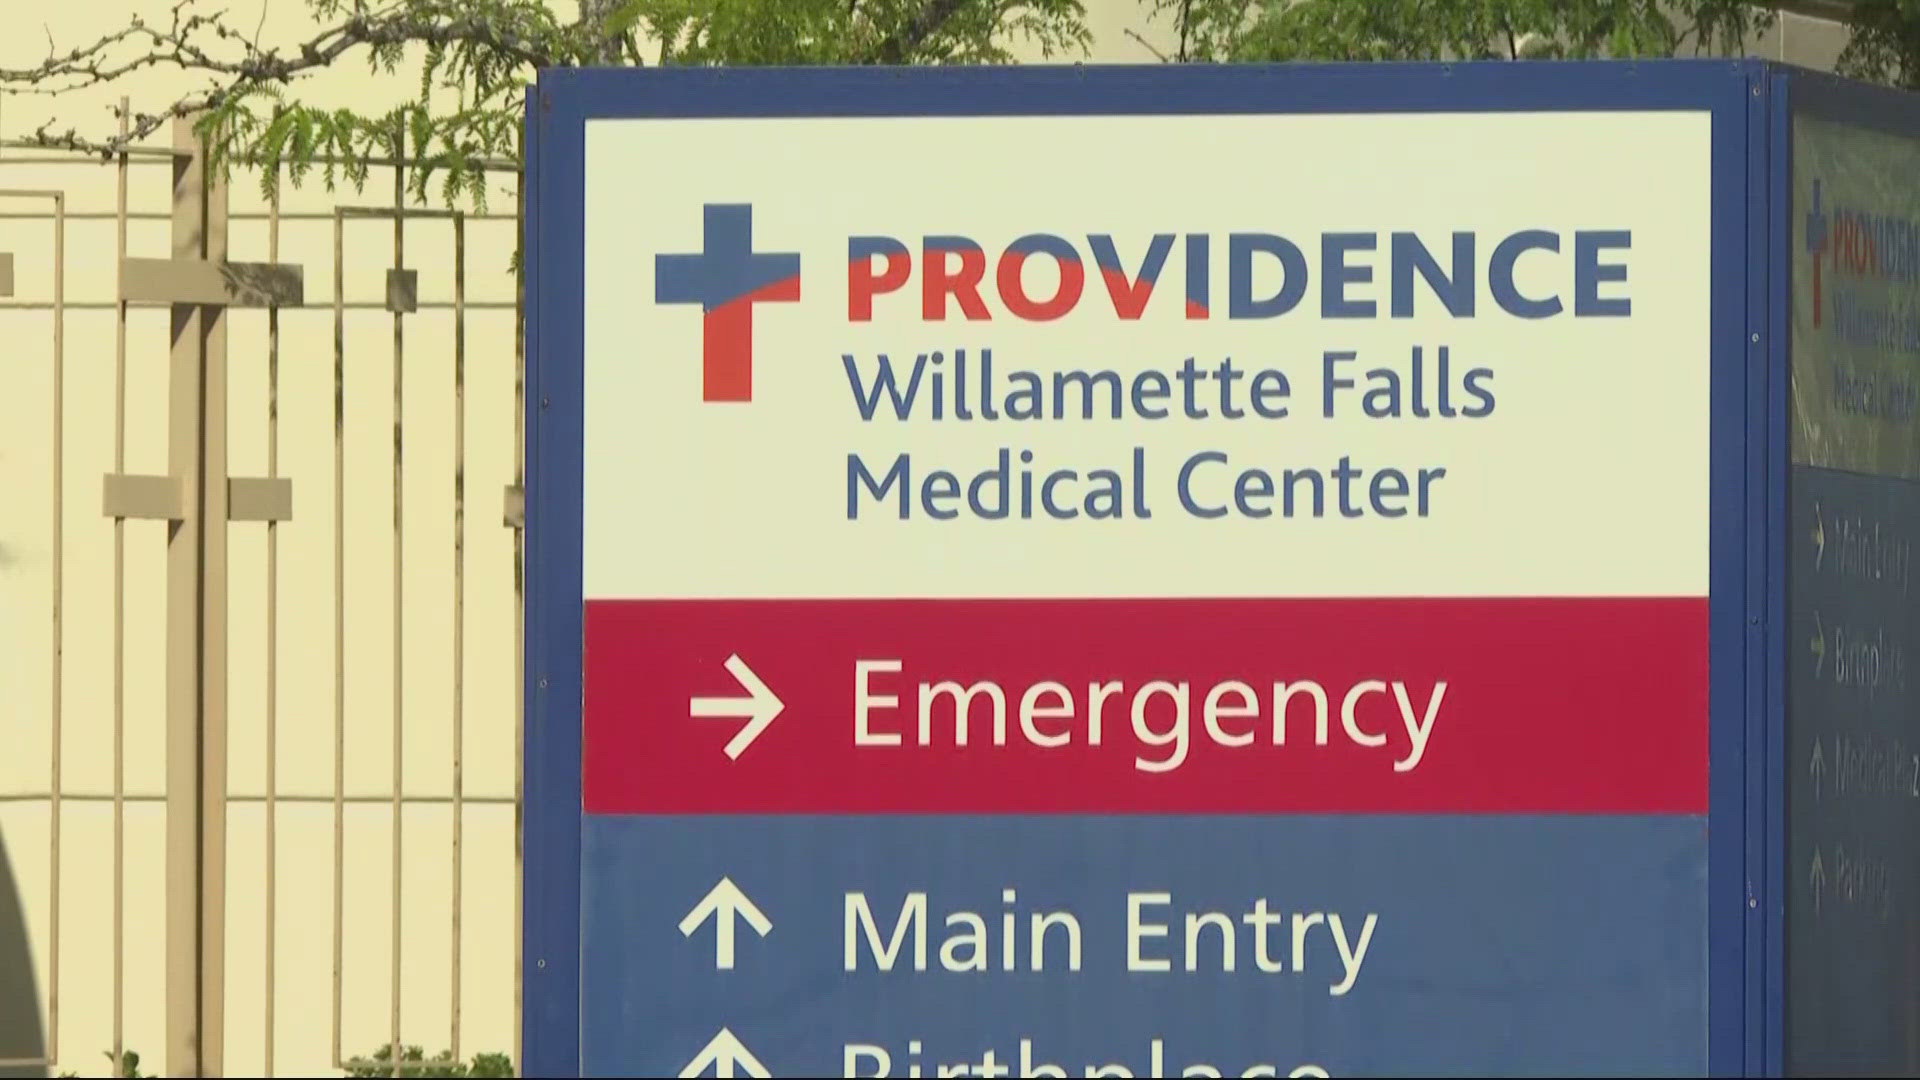 Providence revealed earlier this month that over 2,200 patients may have been exposed to infectious diseases linked to a single anesthesiologist.